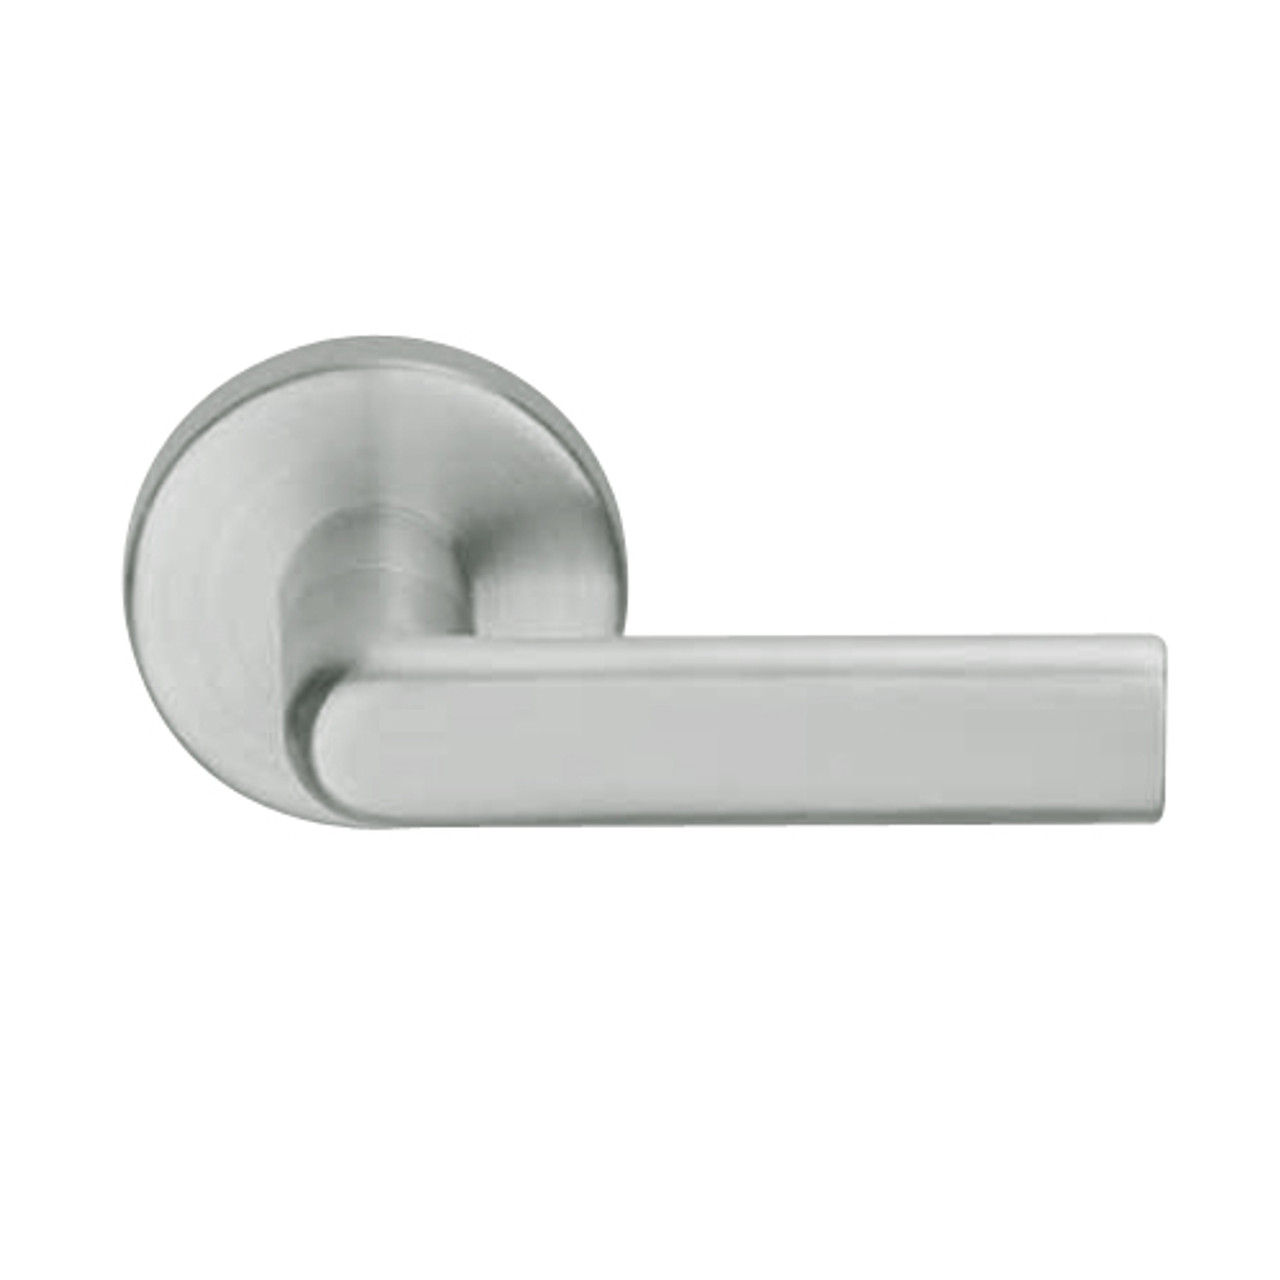 L9486R-01A-619-RH Schlage L Series Faculty Restroom with Do Not Disturb Indicator Mortise Lock with 01 Cast Lever Design and Full Size Core in Satin Nickel